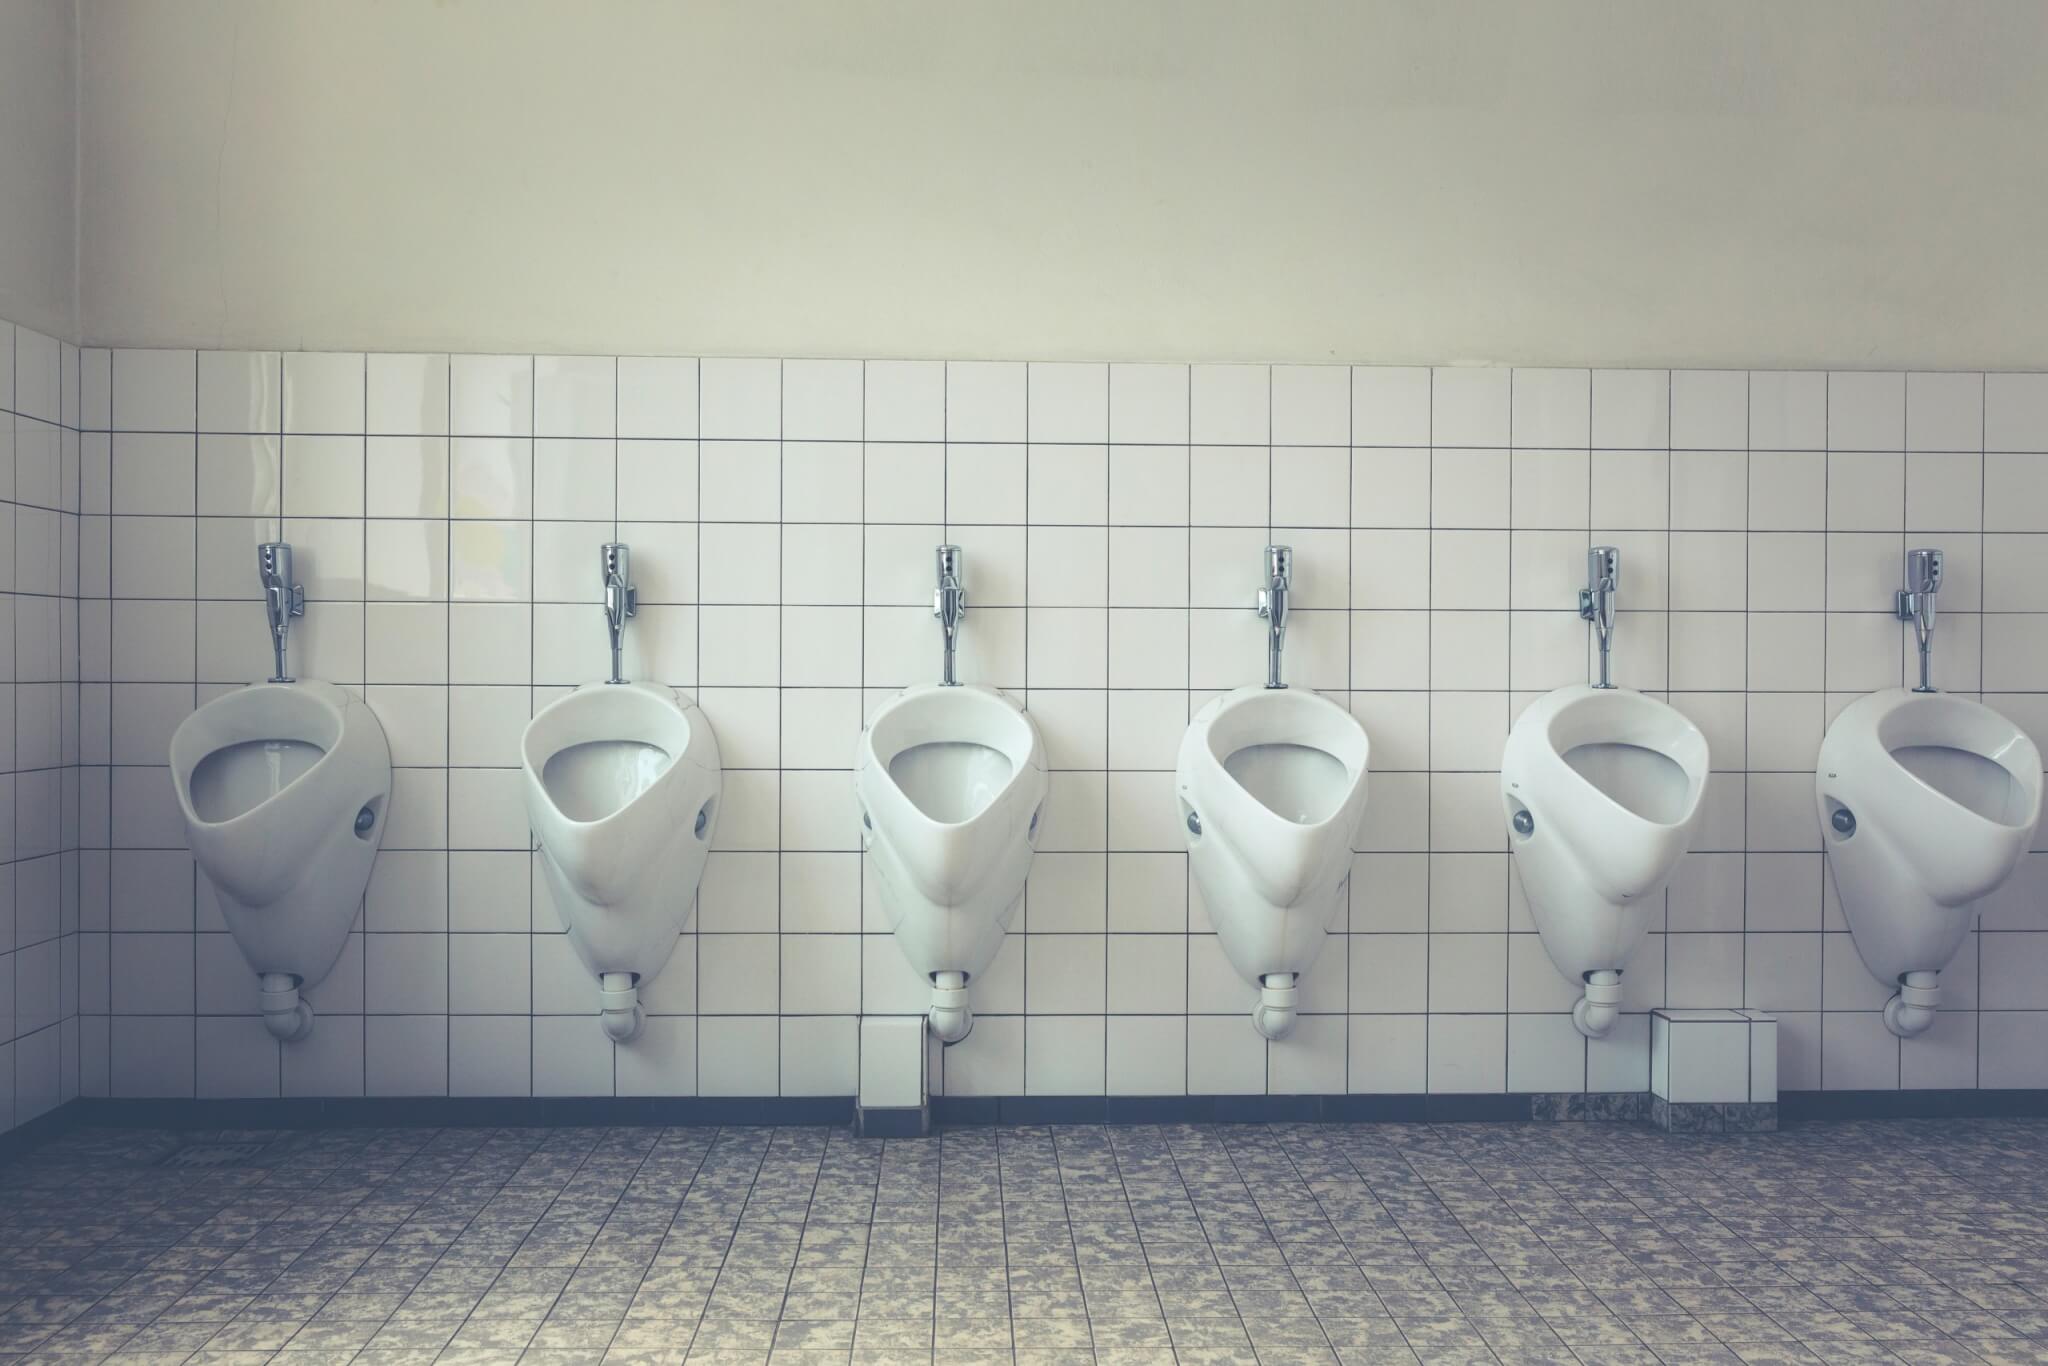 What Microbes Lurked In The Last Public Restroom You Used? : Shots